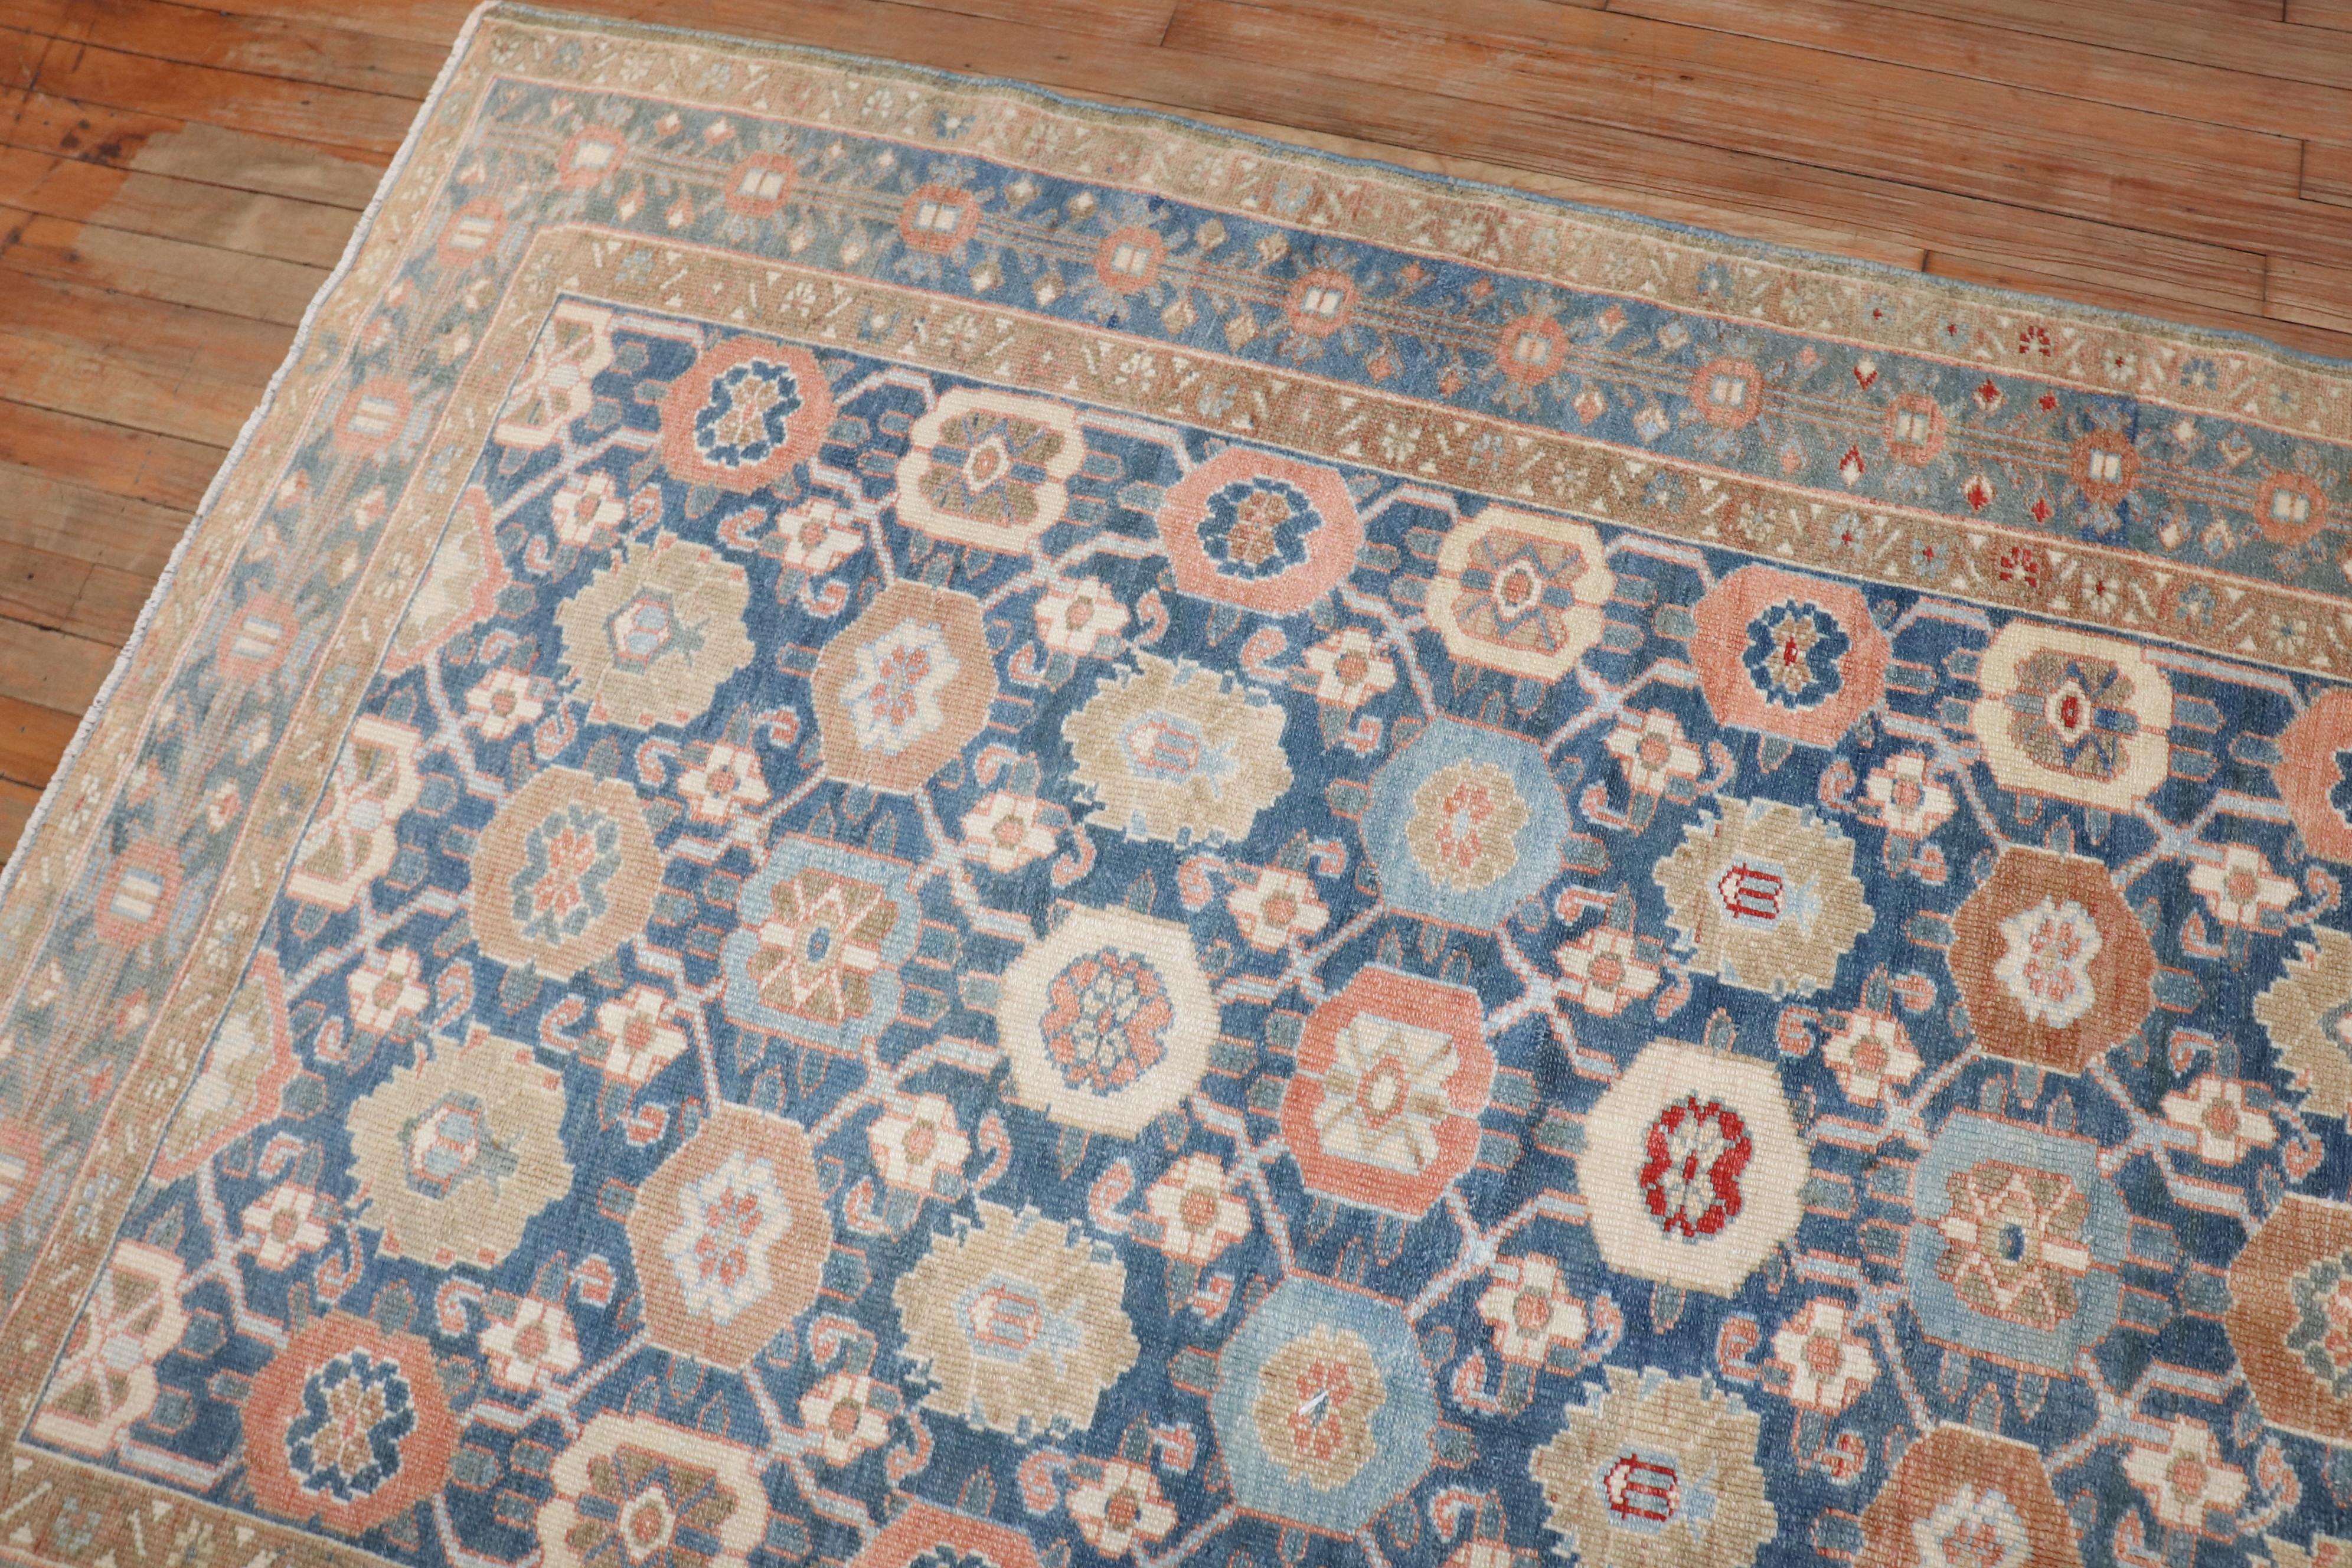 An accent size early 20th century Persian Veramin rug in predominantly blue

Measures: 4'6